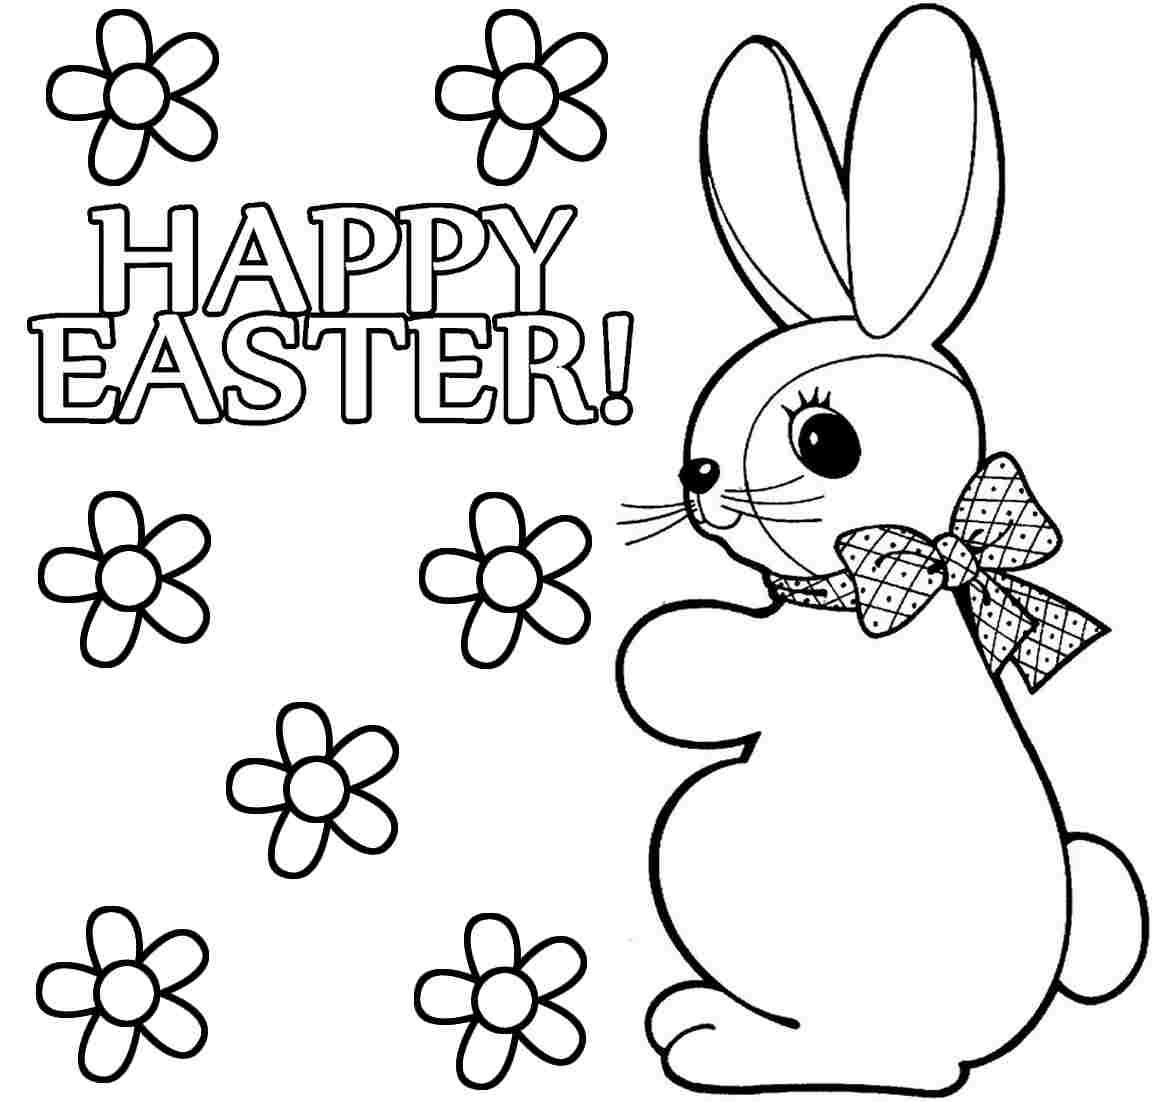 Happy Easter Coloring Pages
 Happy Easter Coloring Pages coloringsuite